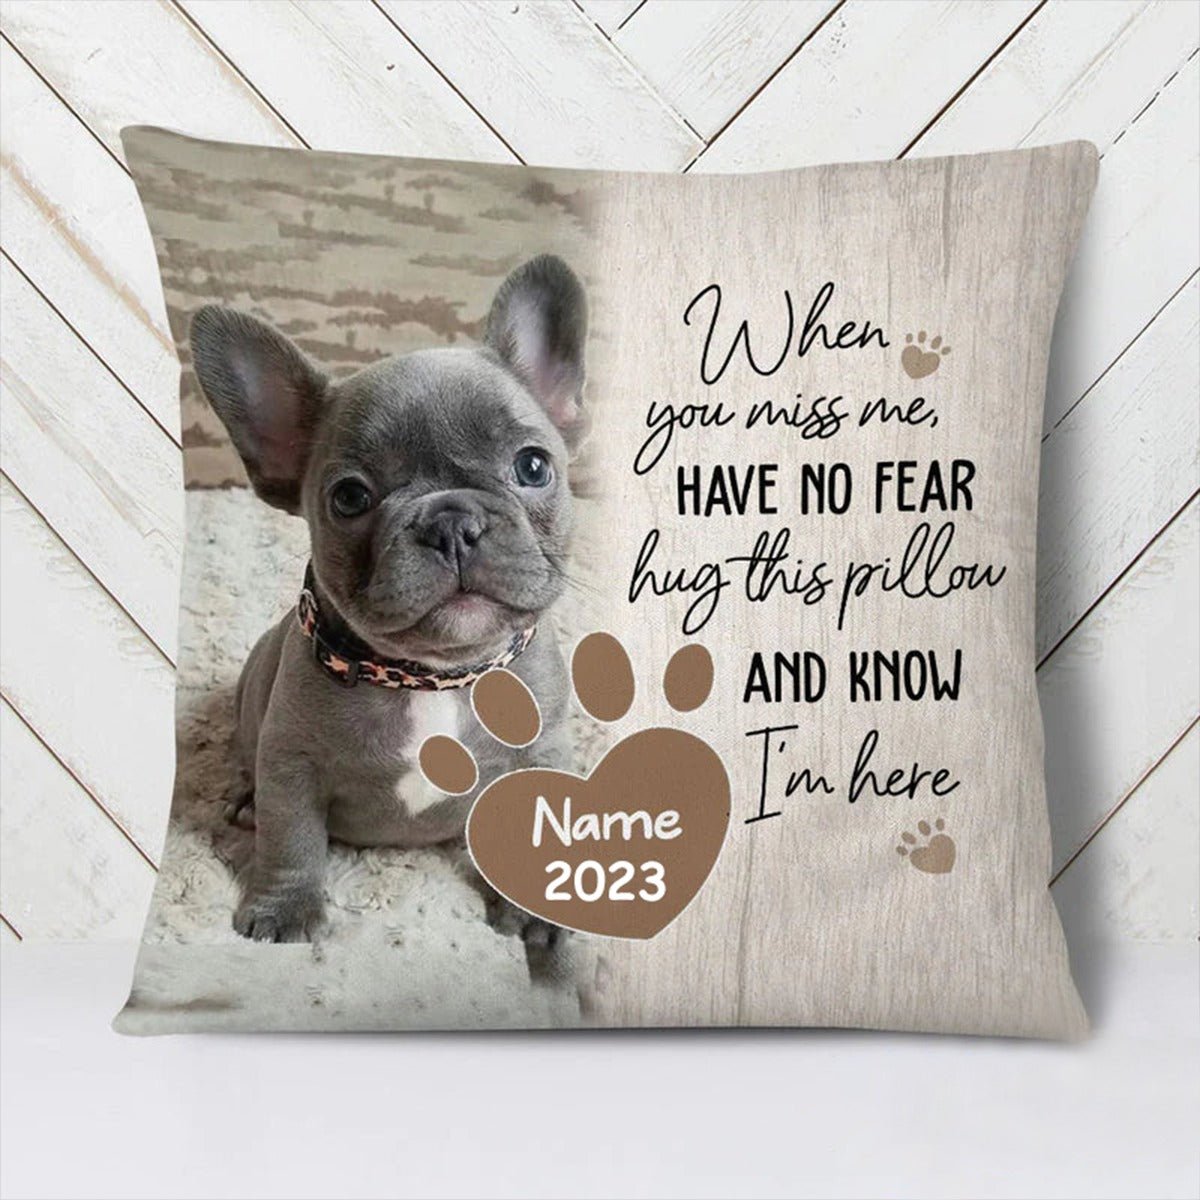 Pet Lovers - Personalized Pet Memorial Pillowcase, When You Miss Me - Personalized Pillow - The Next Custom Gift